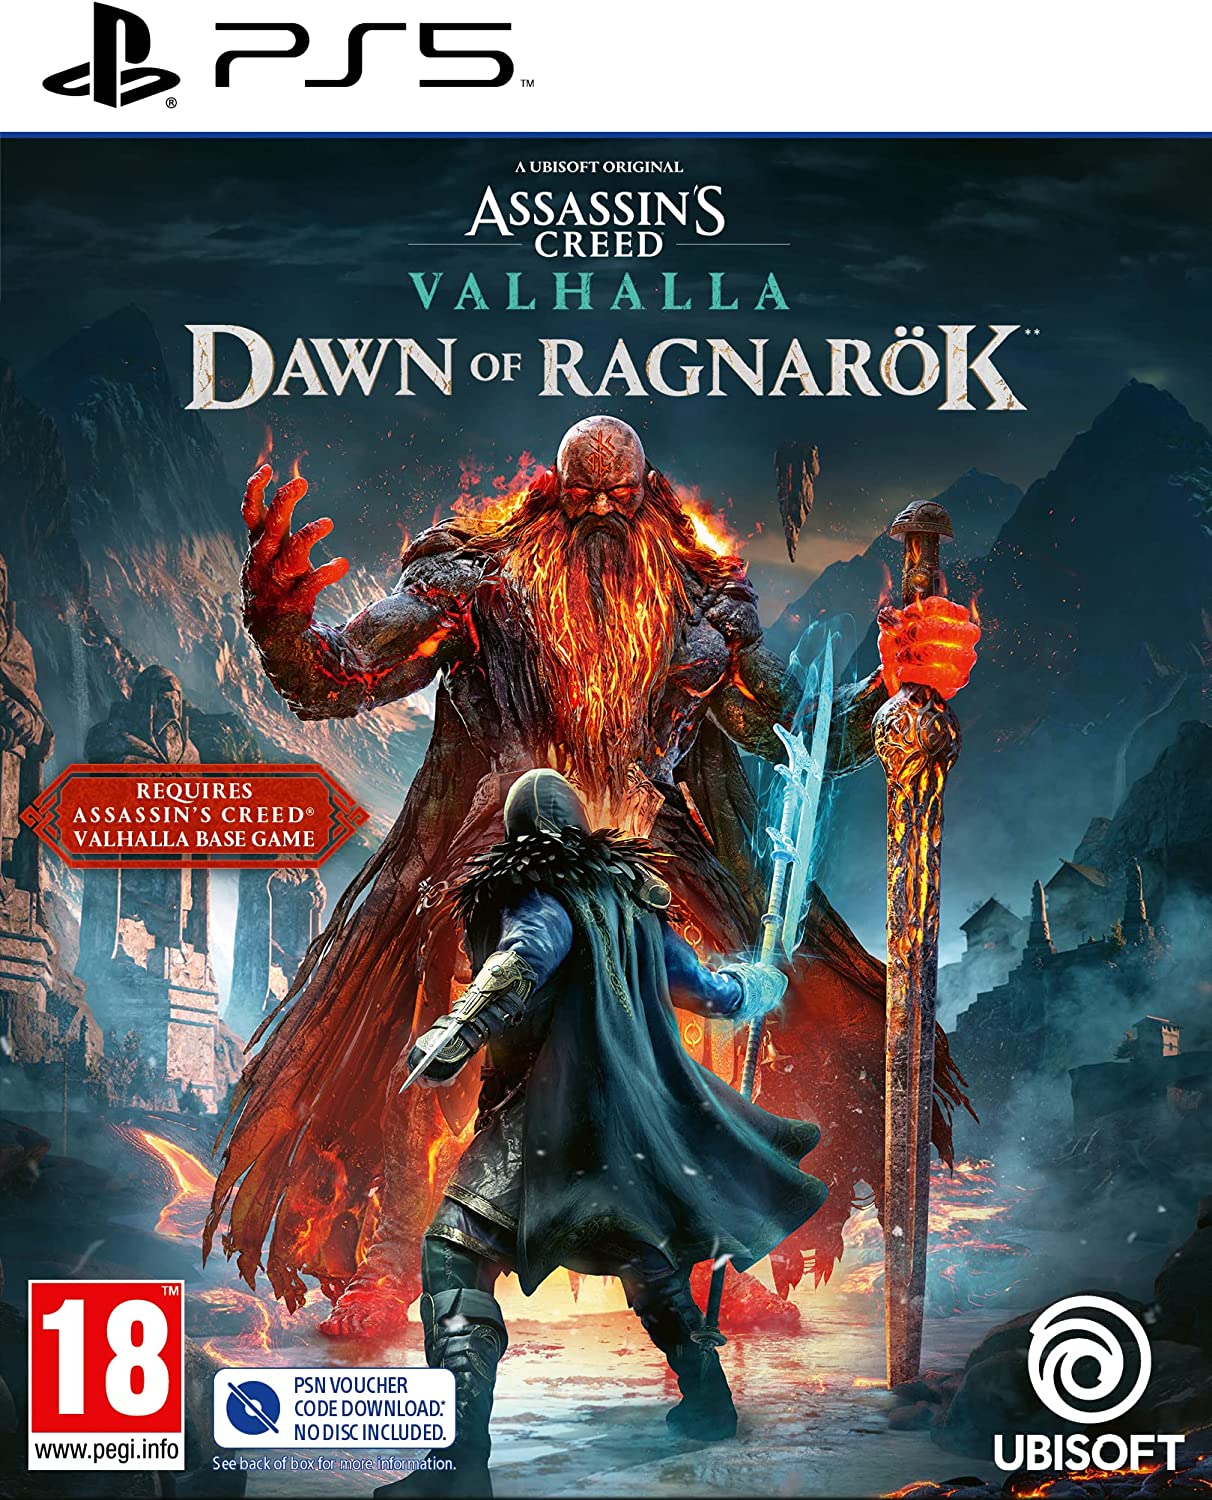 Assassin's Creed Valhalla - Dawn of Ragnarok Expansion (Code) - PS5 Game